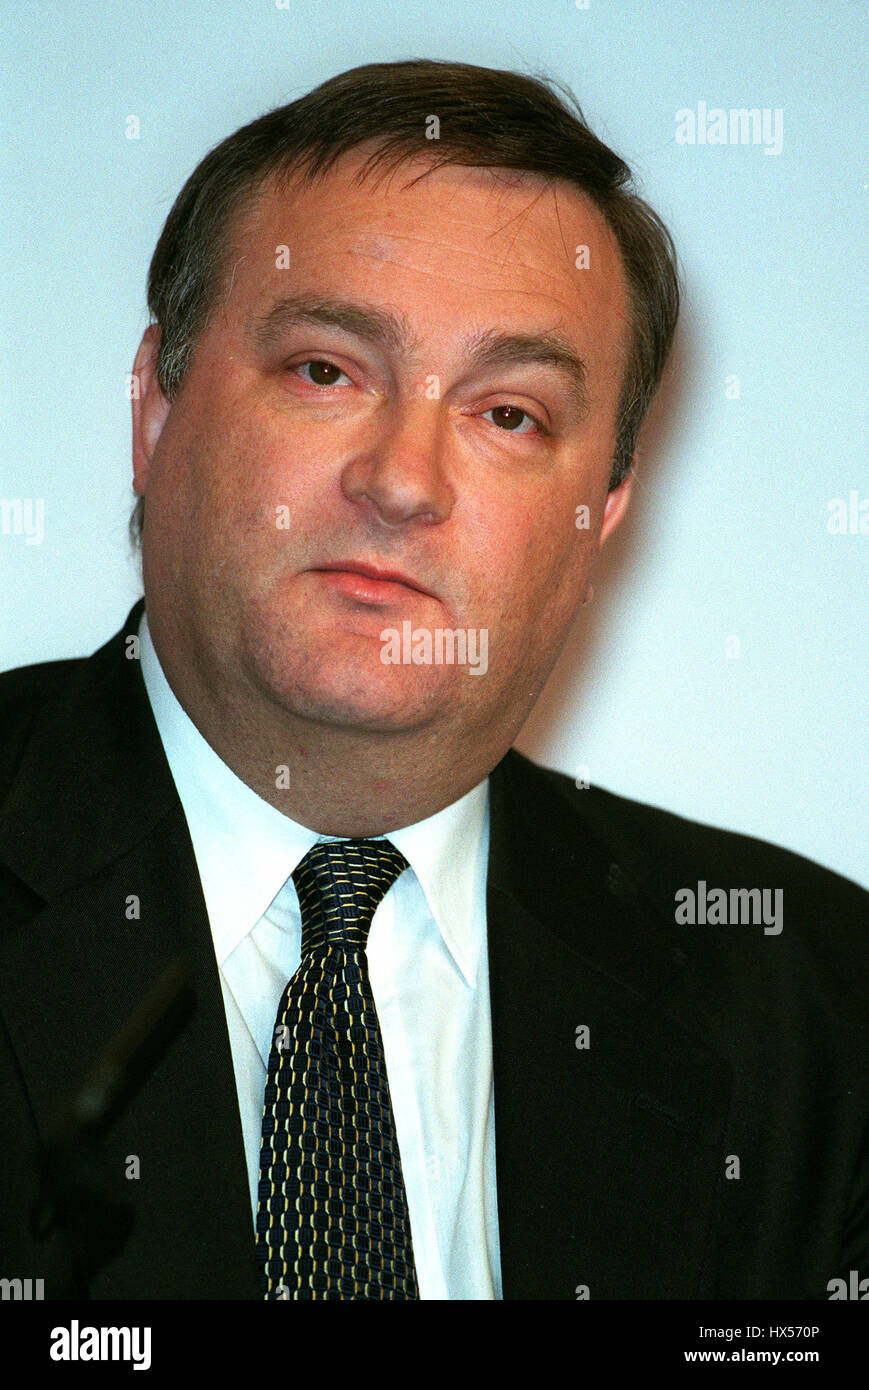 NICK BROWN MP MINISTER FOR AGRICULTURE 24 September 2000 BRIGHTON ...